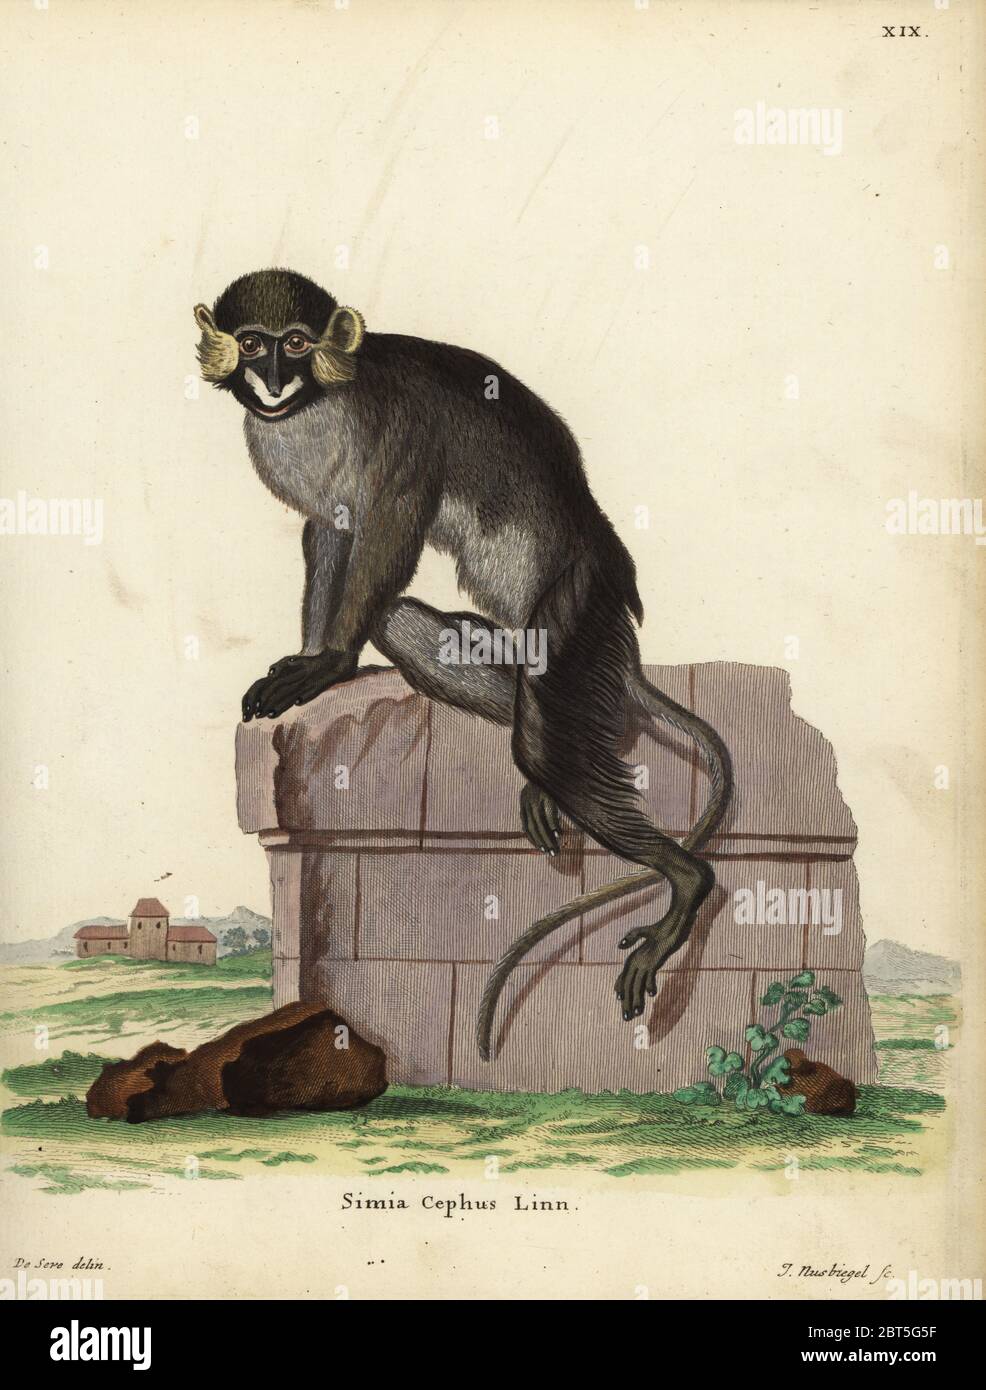 Moustached guenon or moustached monkey, Cercopithecus cephus. Simia cephus Linn. Handcoloured copperplate engraving by Johann Nussbiegel after an illustration by Jacques de Seve from Johann Christian Daniel Schreber's Animal Illustrations after Nature, or Schreber's Fantastic Animals, Erlangen, Germany, 1775. Stock Photo